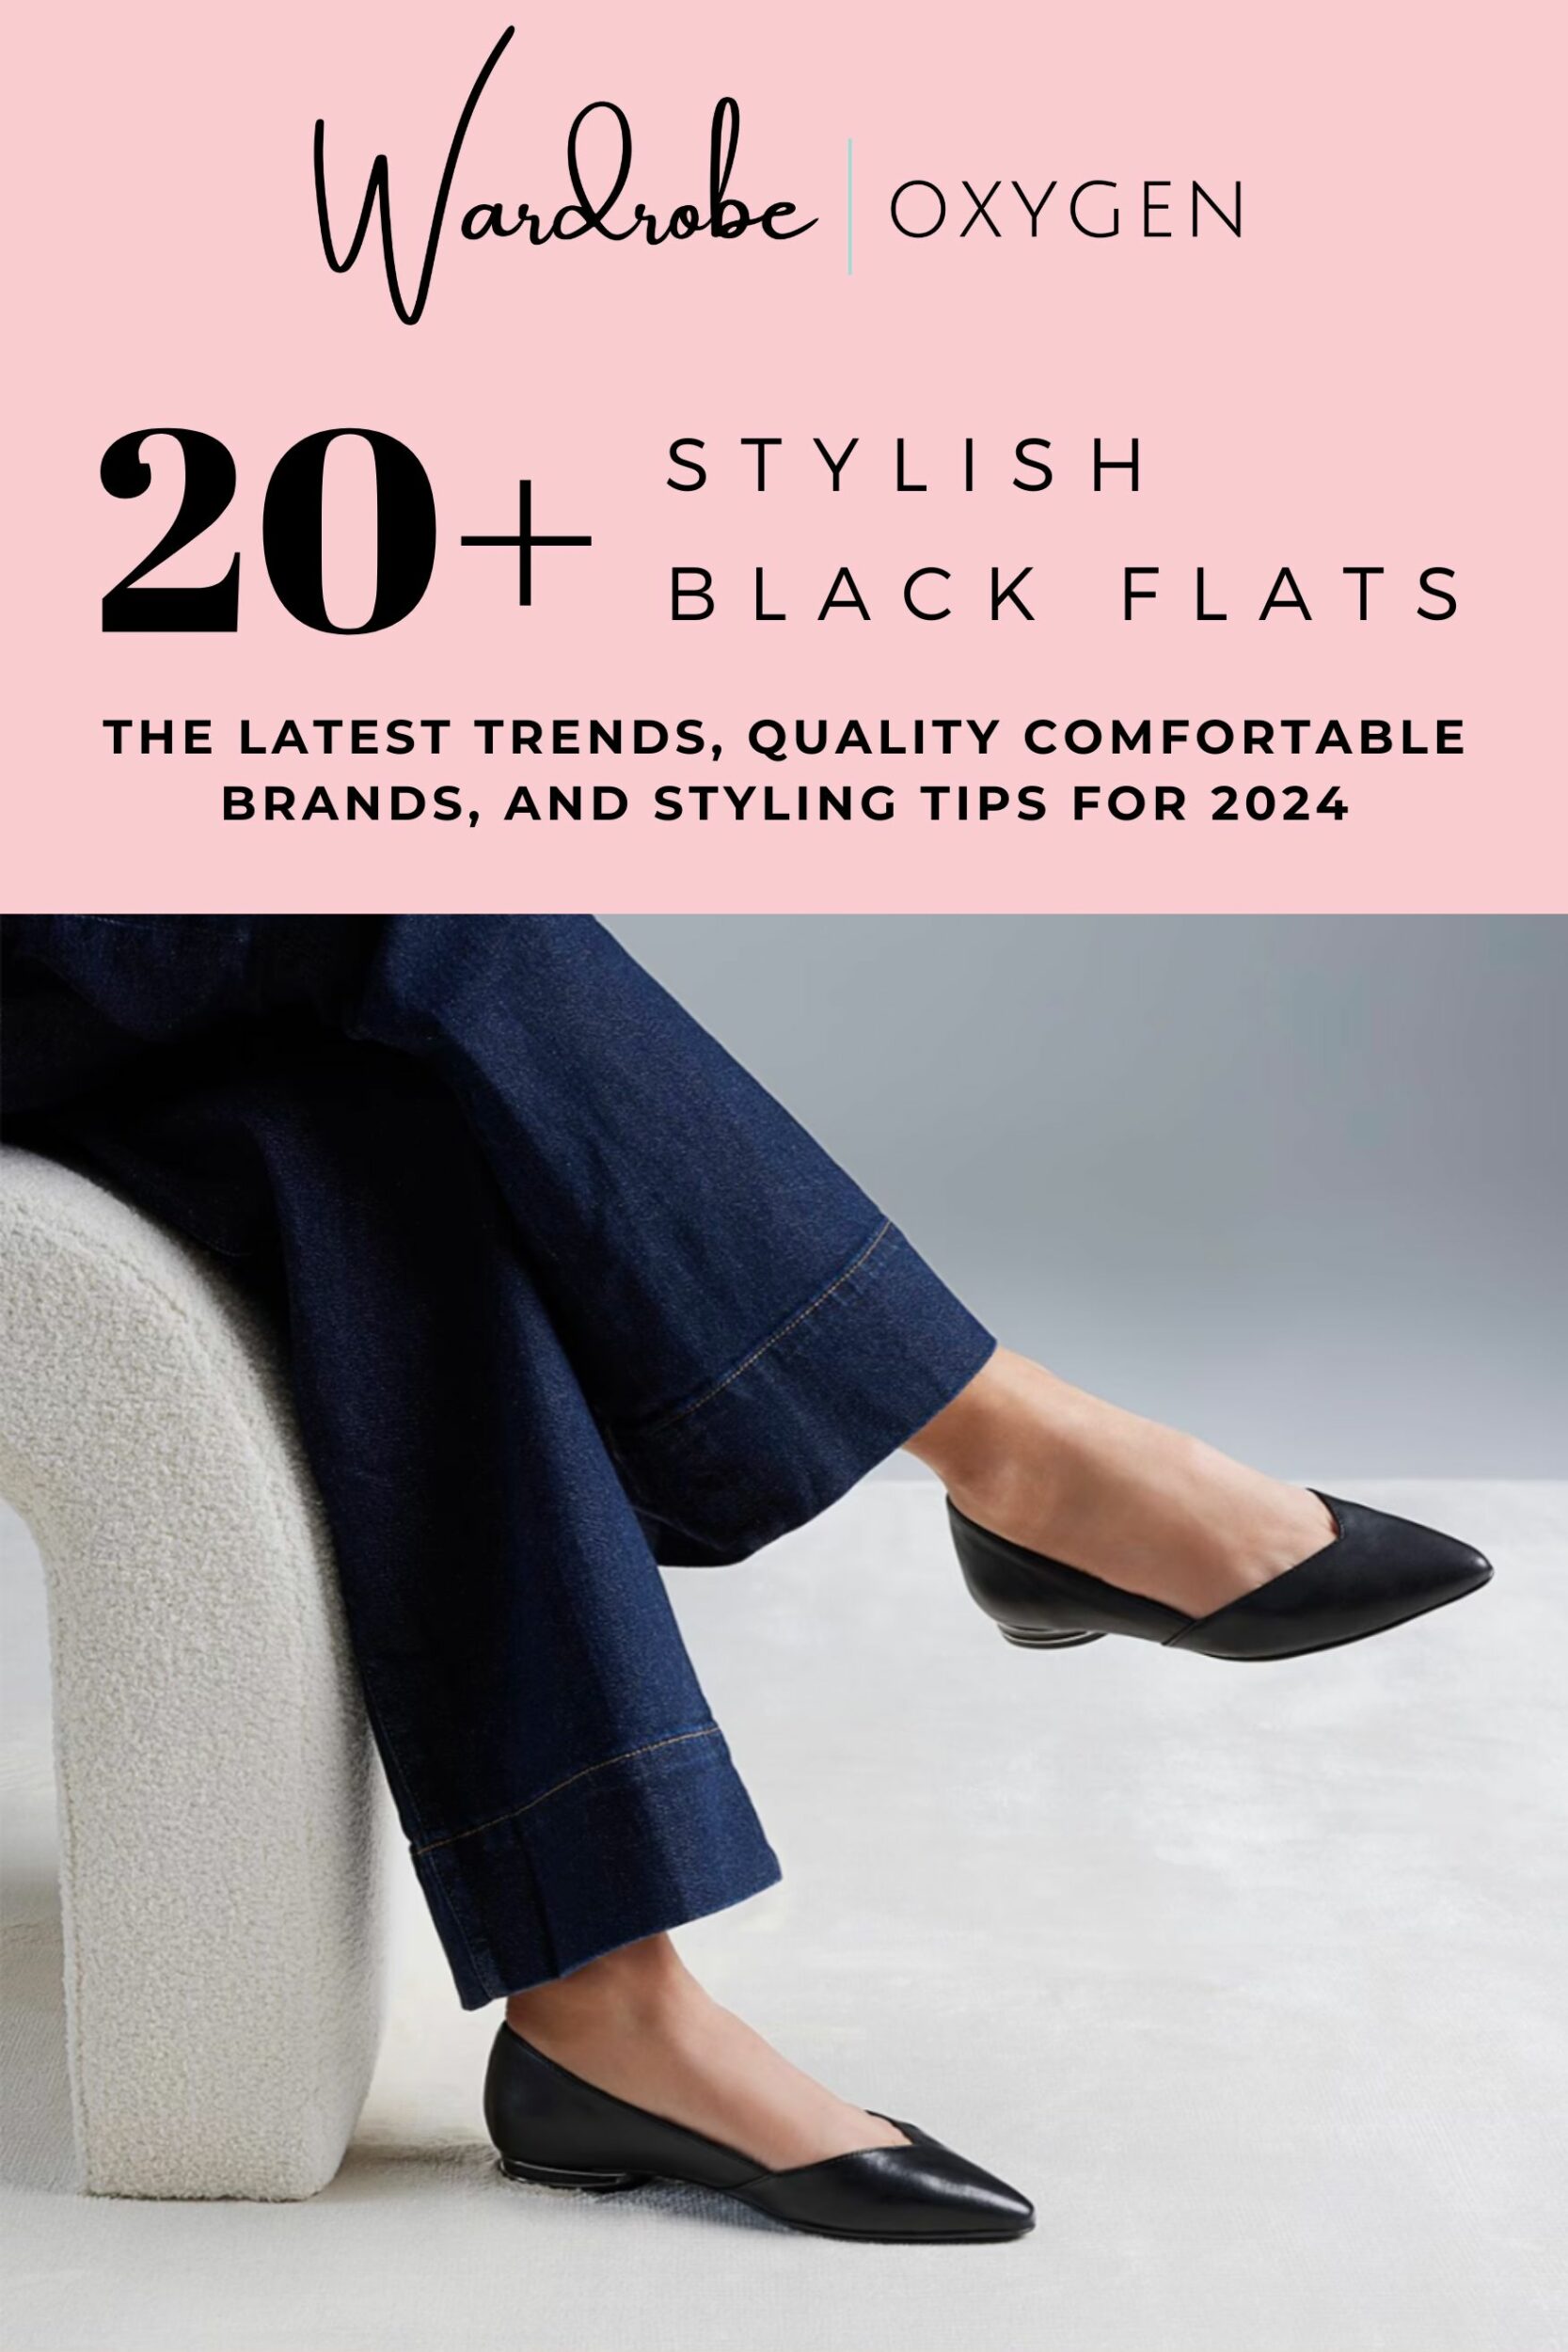 Where Have All The Black Flats Gone? 20+ Stylish Black Flats for Spring